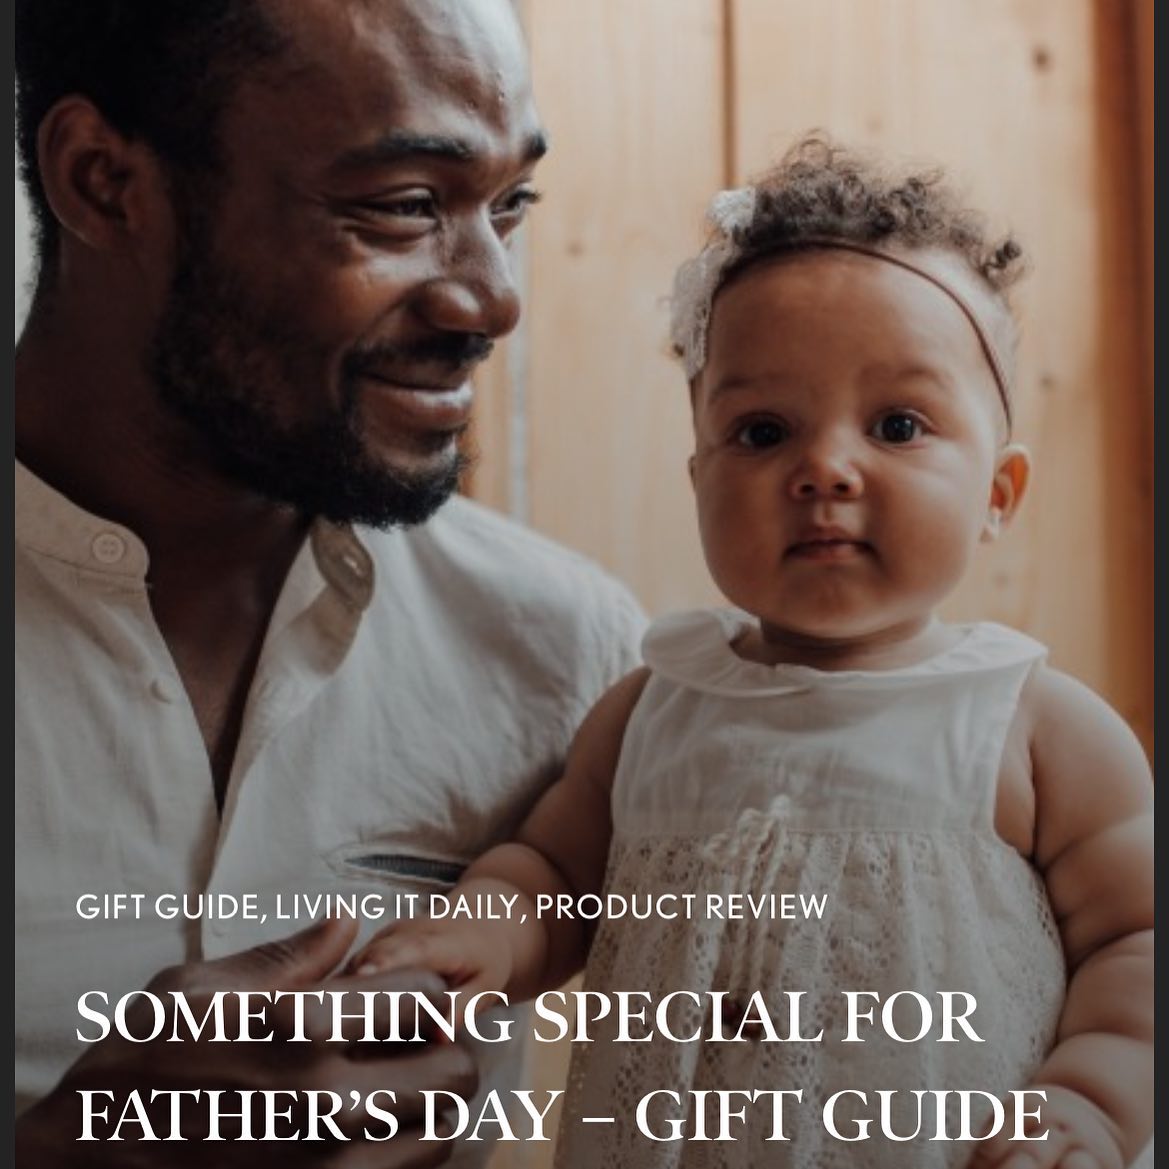 A Gift For Dad
In honoring fathers and fatherhood, we also recognize their influence on society. So here are a few gestures to show your Dad or Father Figure how special they are to you this Father's Day. Whether your dad is tech-savvy or a jet-setter, we have a few gift items that would excite them.
Check out more  Father’s Day gifts  on lividmagazine.com
————————————————
#Dad #Fathersday #Father #gift  #tech #love #design #art #designer #creative #create #love #instagood #beautiful #style #summer #sale #fun #igers  #instamood #Atlanta #NewYork #Virgina #DC #Maryland  #California  #inspiration #giftguide